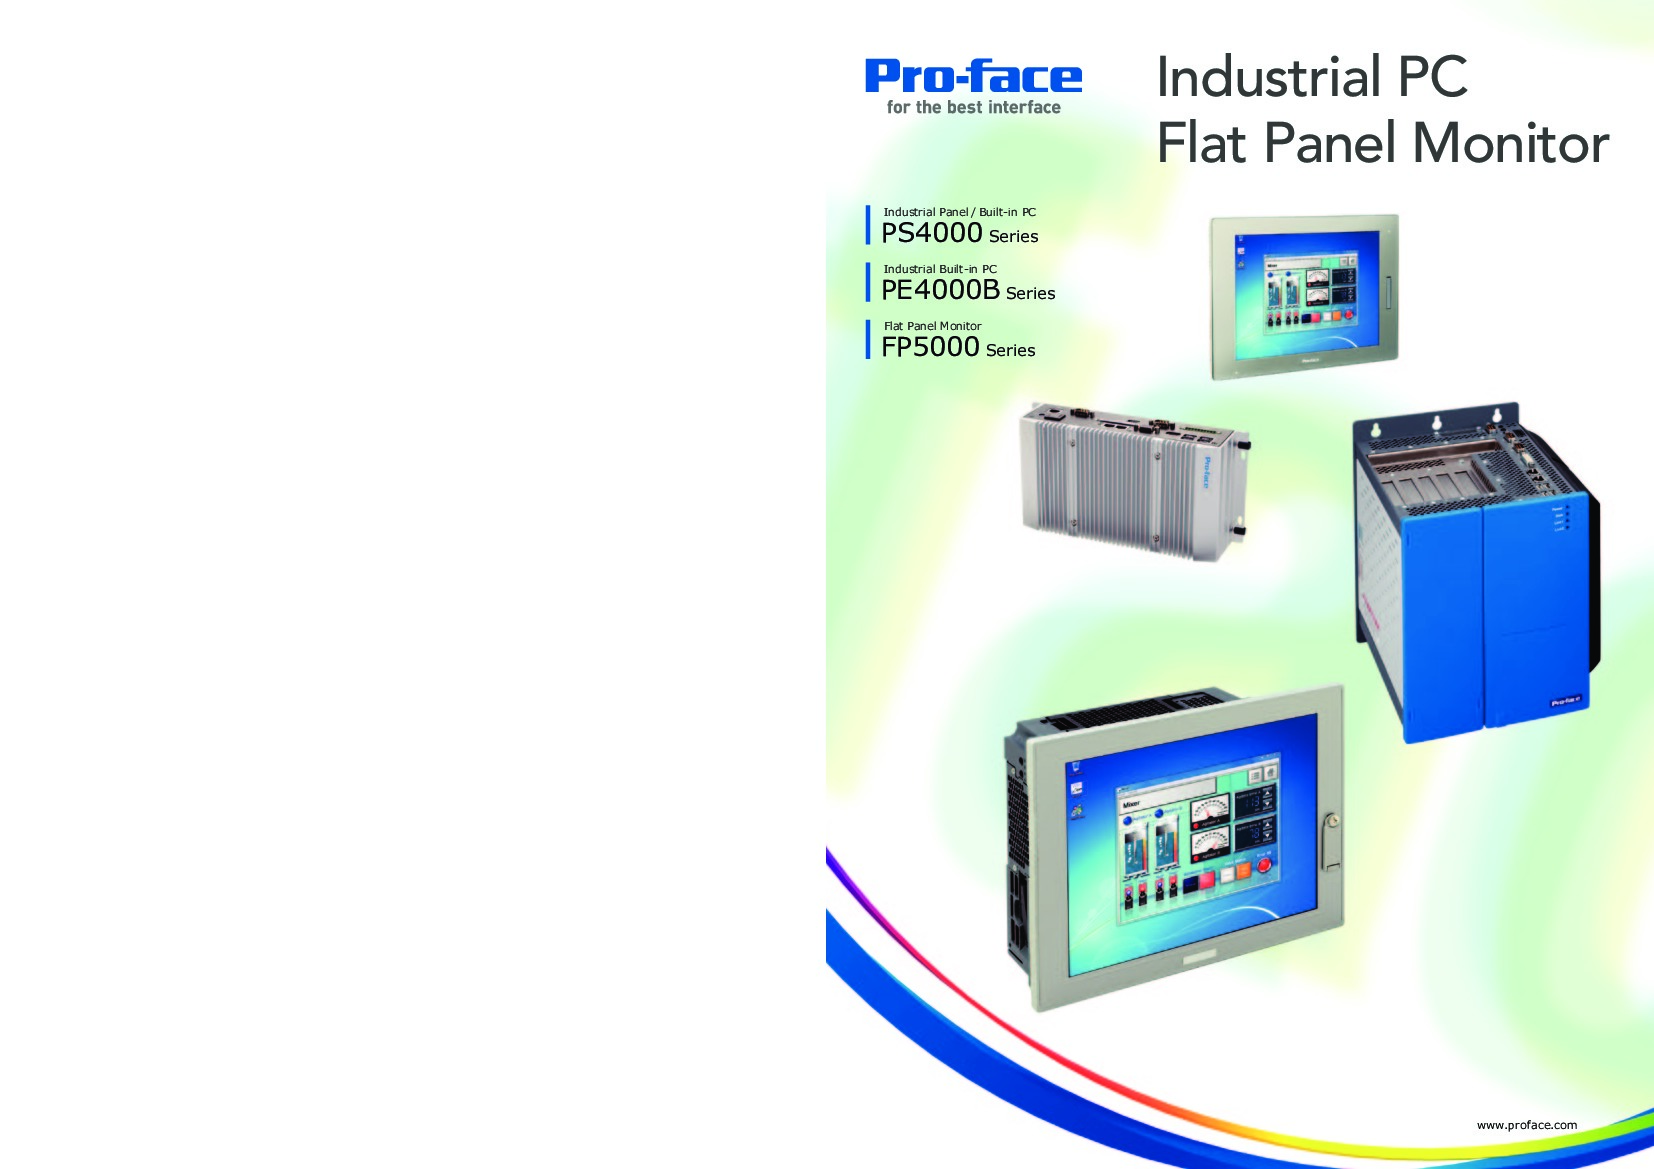 First Page Image of PFXPP160DA55P04N00 PS4000 Series Pro-Face Catalog.pdf